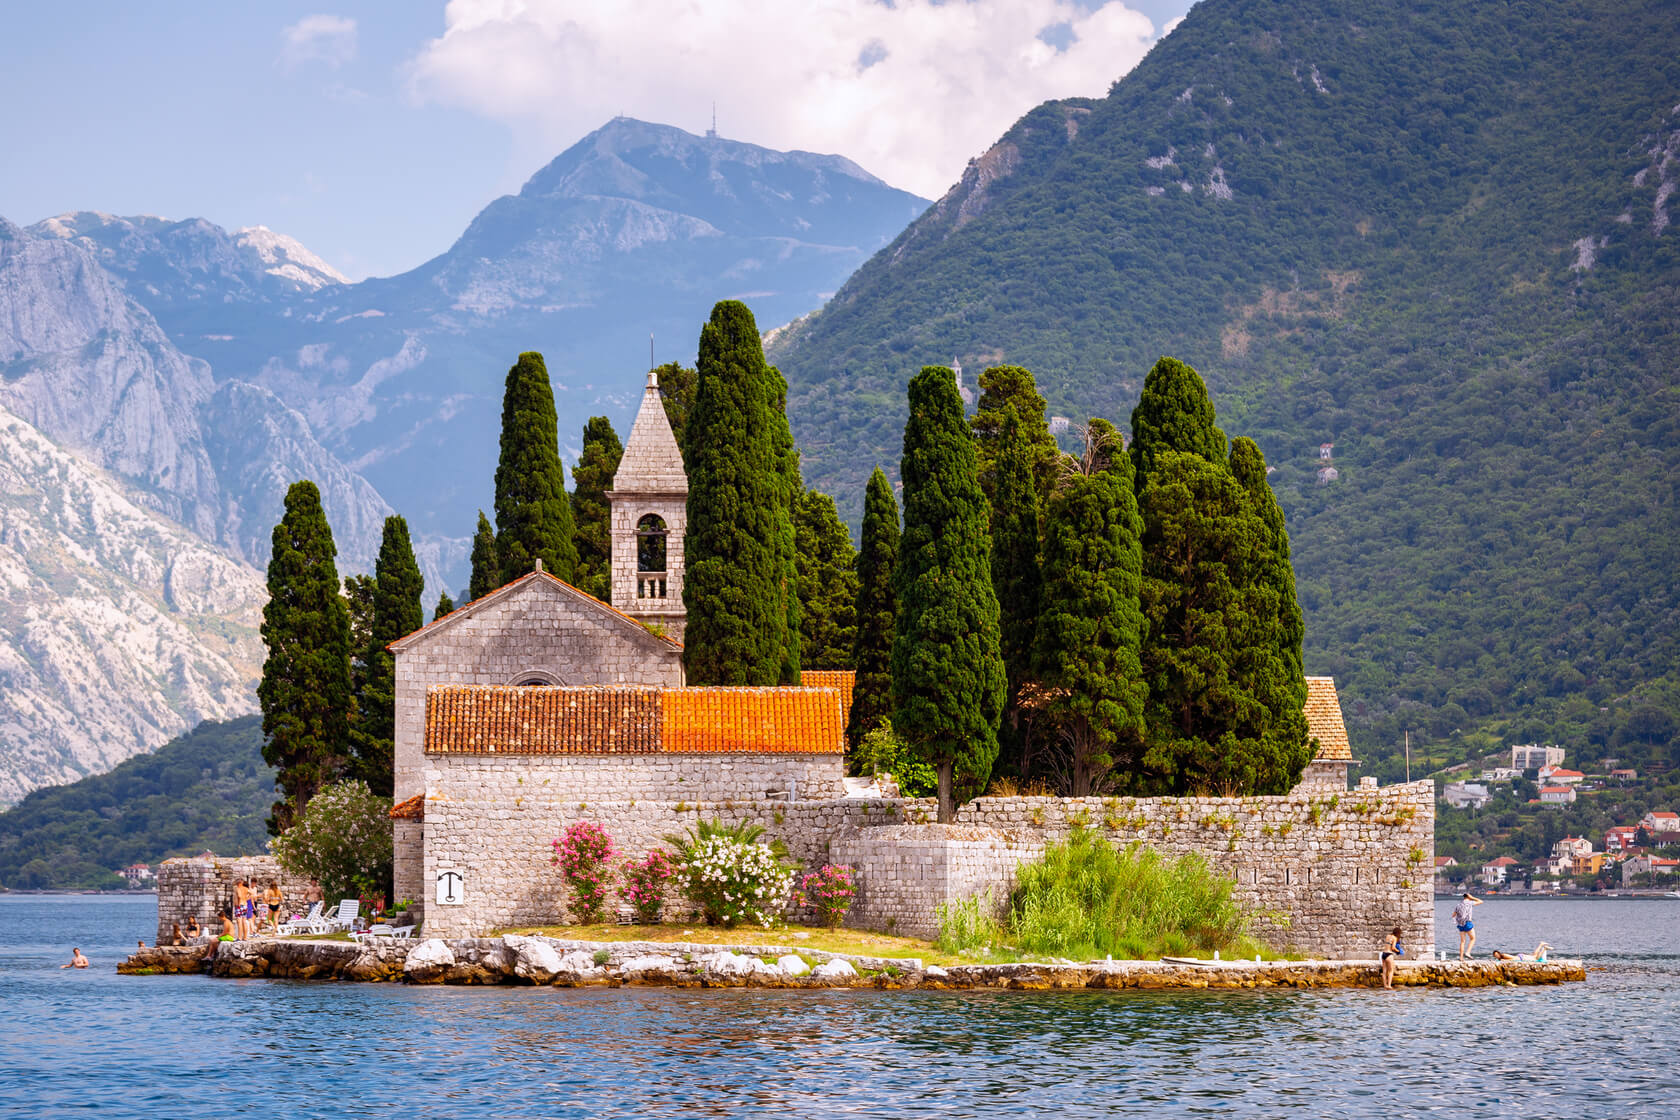 https://www.gettyimages.com/detail/photo/sveti-juraj-monastery-saint-george-island-perast-royalty-free-image/1159470601(Perast, Our lady of the rocks)The beautiful and iconic Sveti Juraj Monastery on Saint George Island in Perast, Montenegro Photograph taken from near the Our Lady of the Rocks during the day.